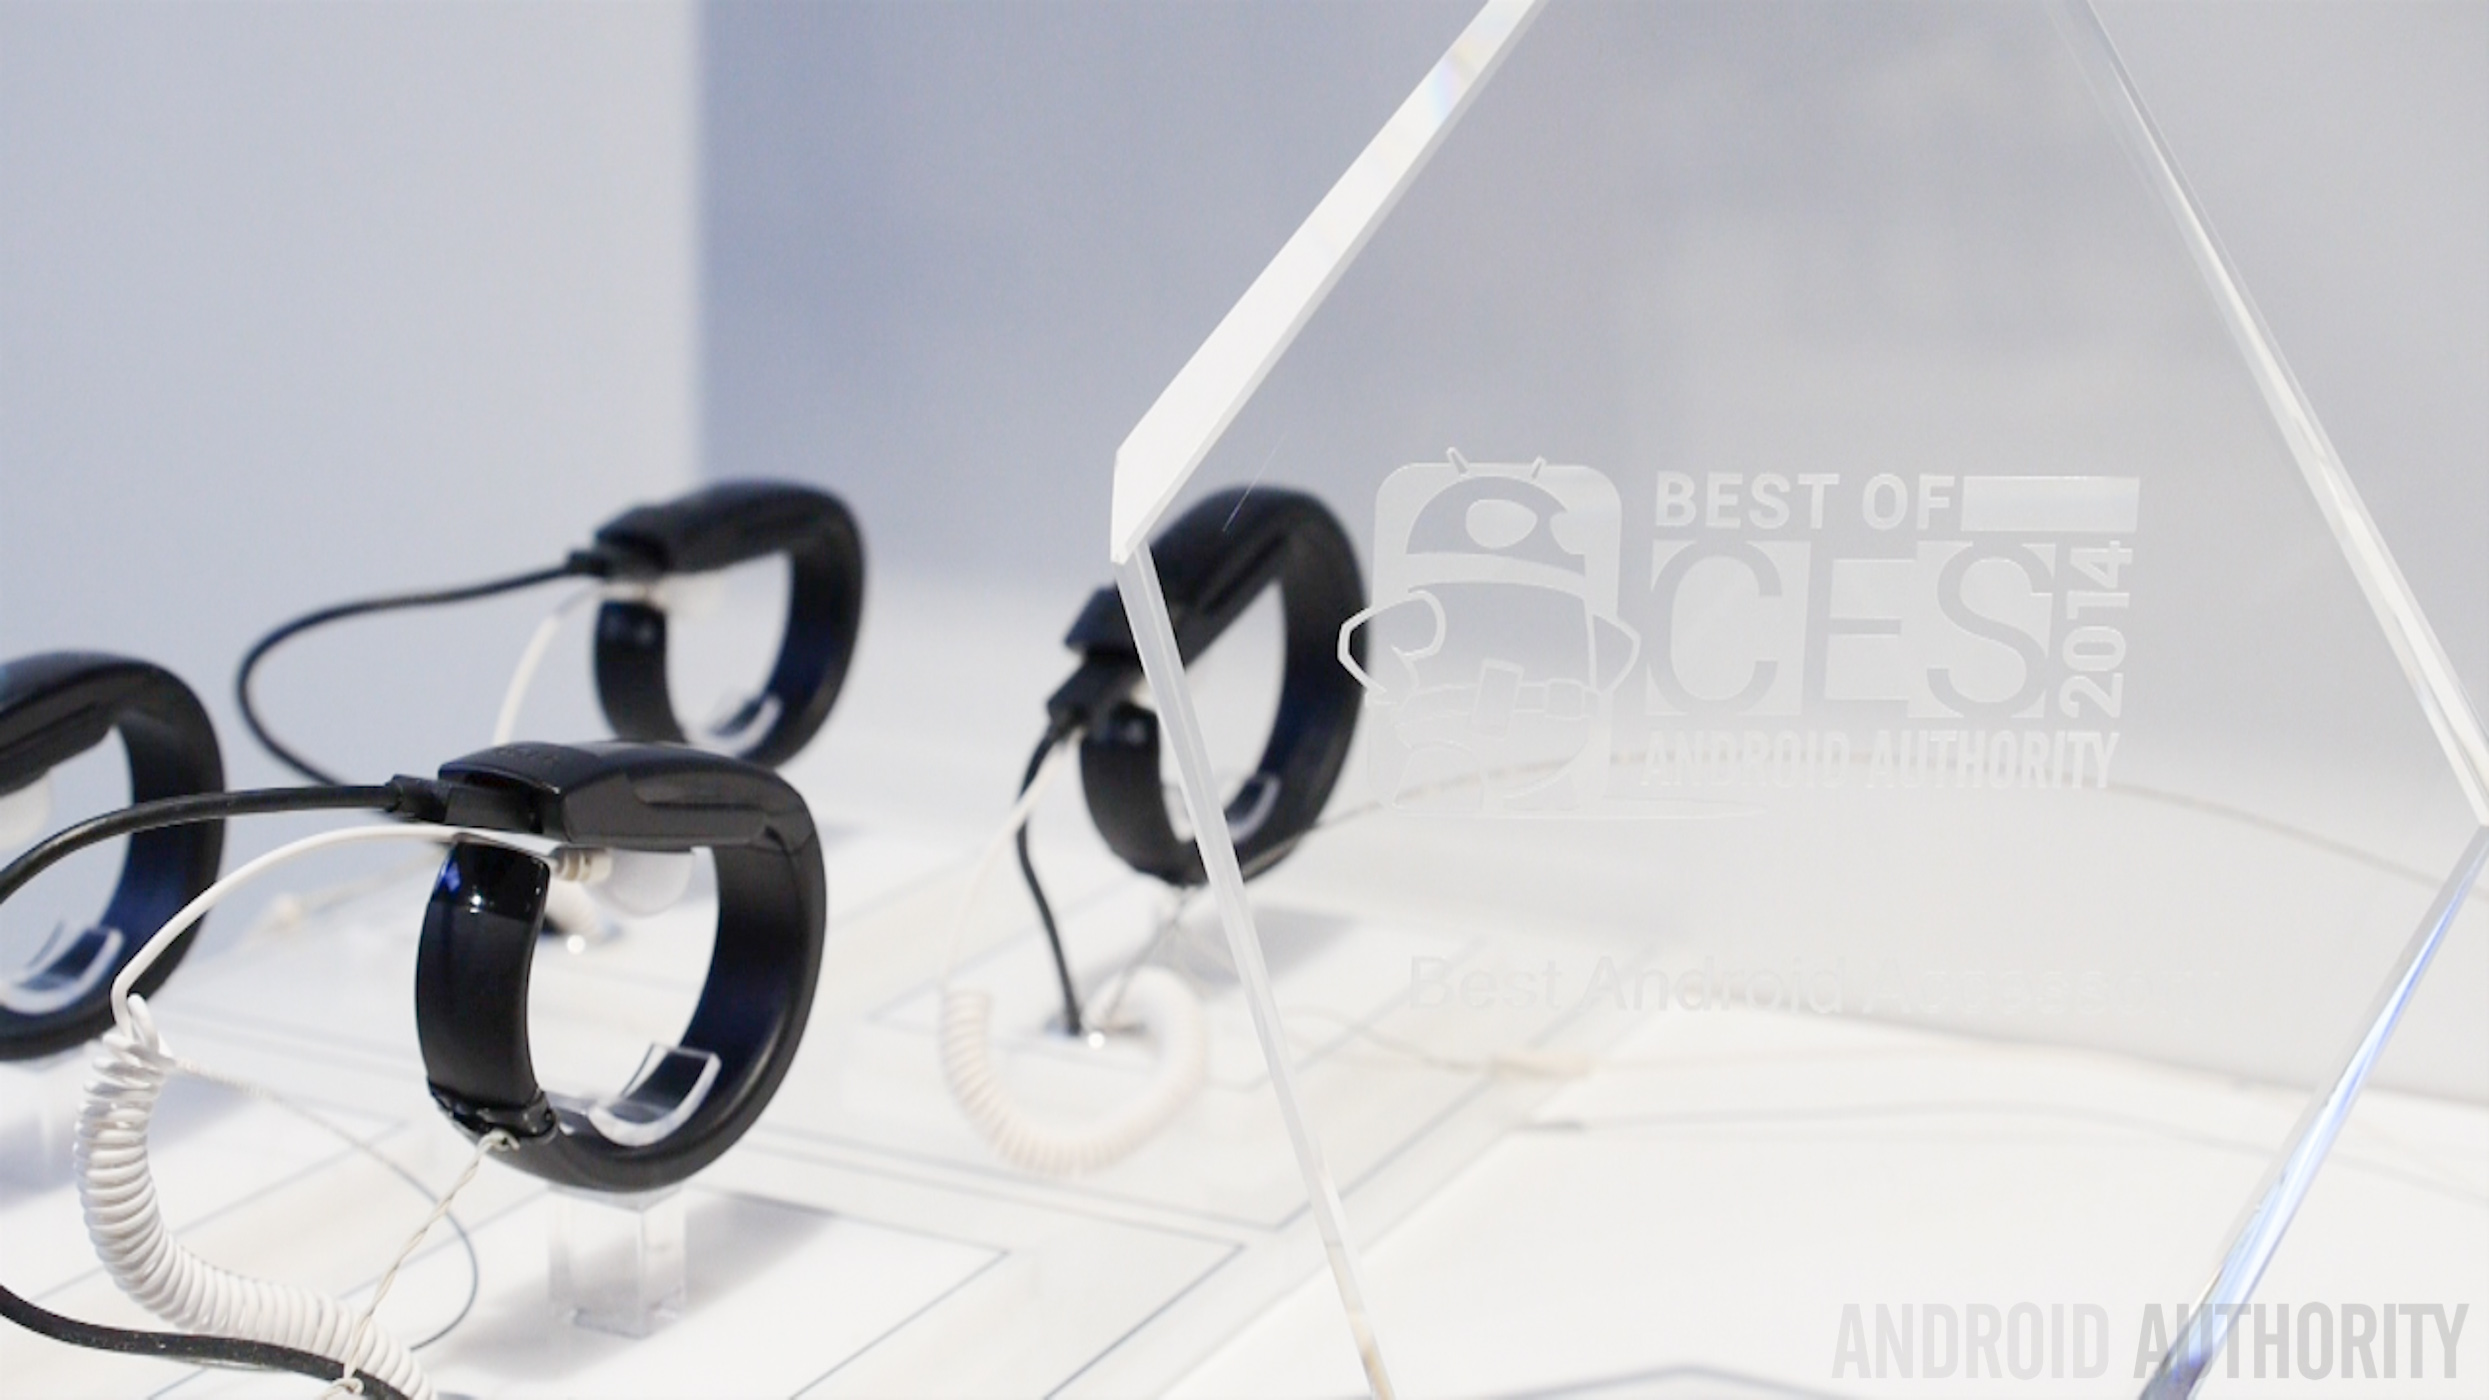 Best Android Accessory LG Lifeband CES 2014 Android Authority-6